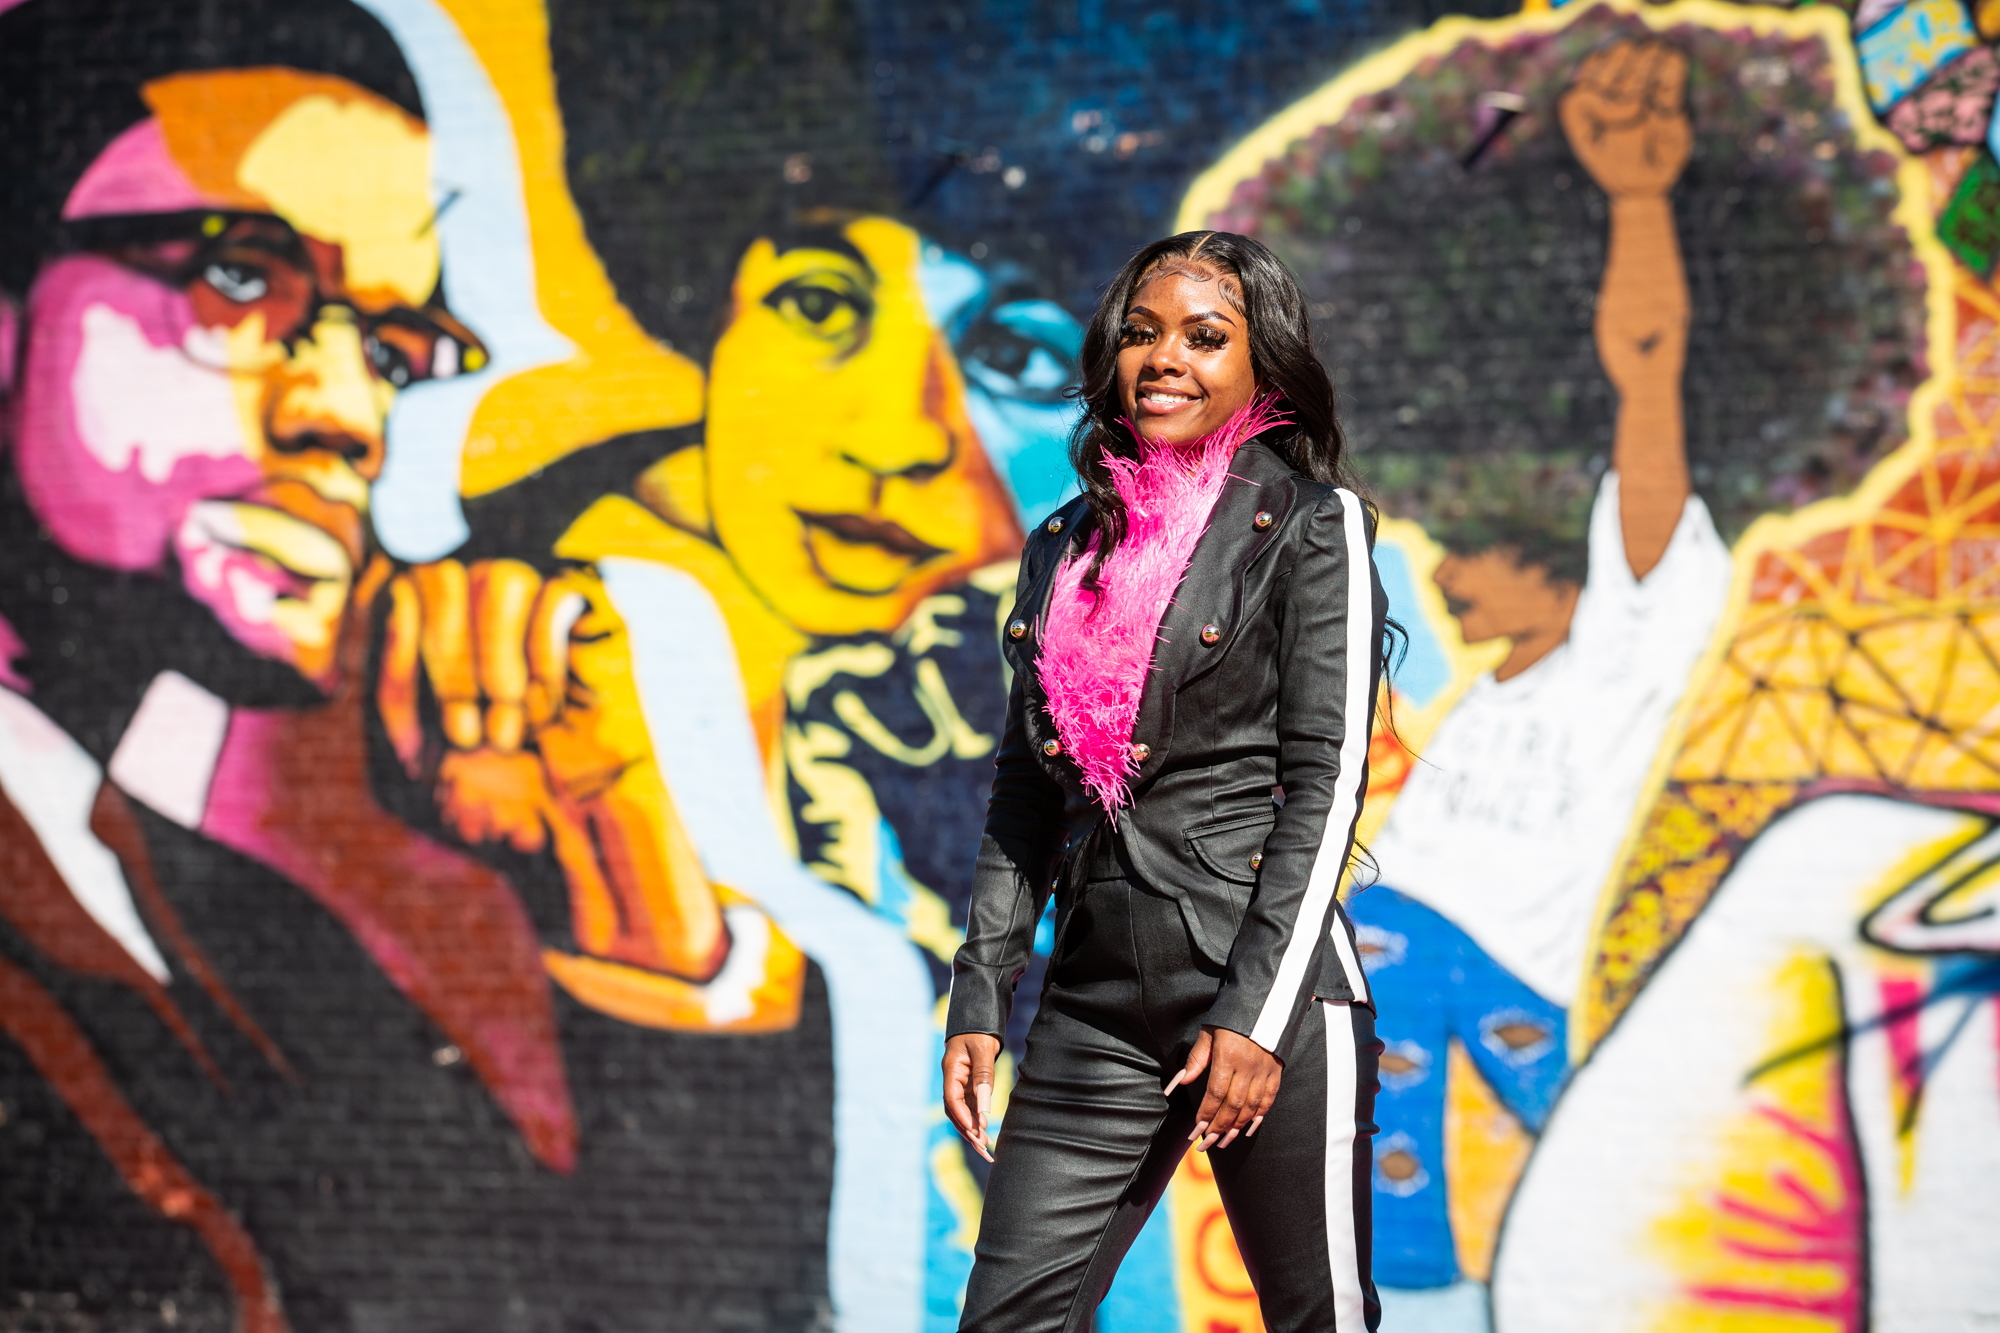 Image: Destine Phillips poses for a portrait at the POP Court public plaza in Chicago's Austin neighborhood. Destine wears black pants and jacket and a pink scarf, and she is looking at the camera while smiling. Behind her is a mural featuring images of Malcolm X, Angela Davis, and a girl with a “girl power” t-shirt raising her left arm and fist into the air. The mural is painted in bright hues of pink, red, orange, yellow, blue, green, and black. Photograph by Kristie Kahns.